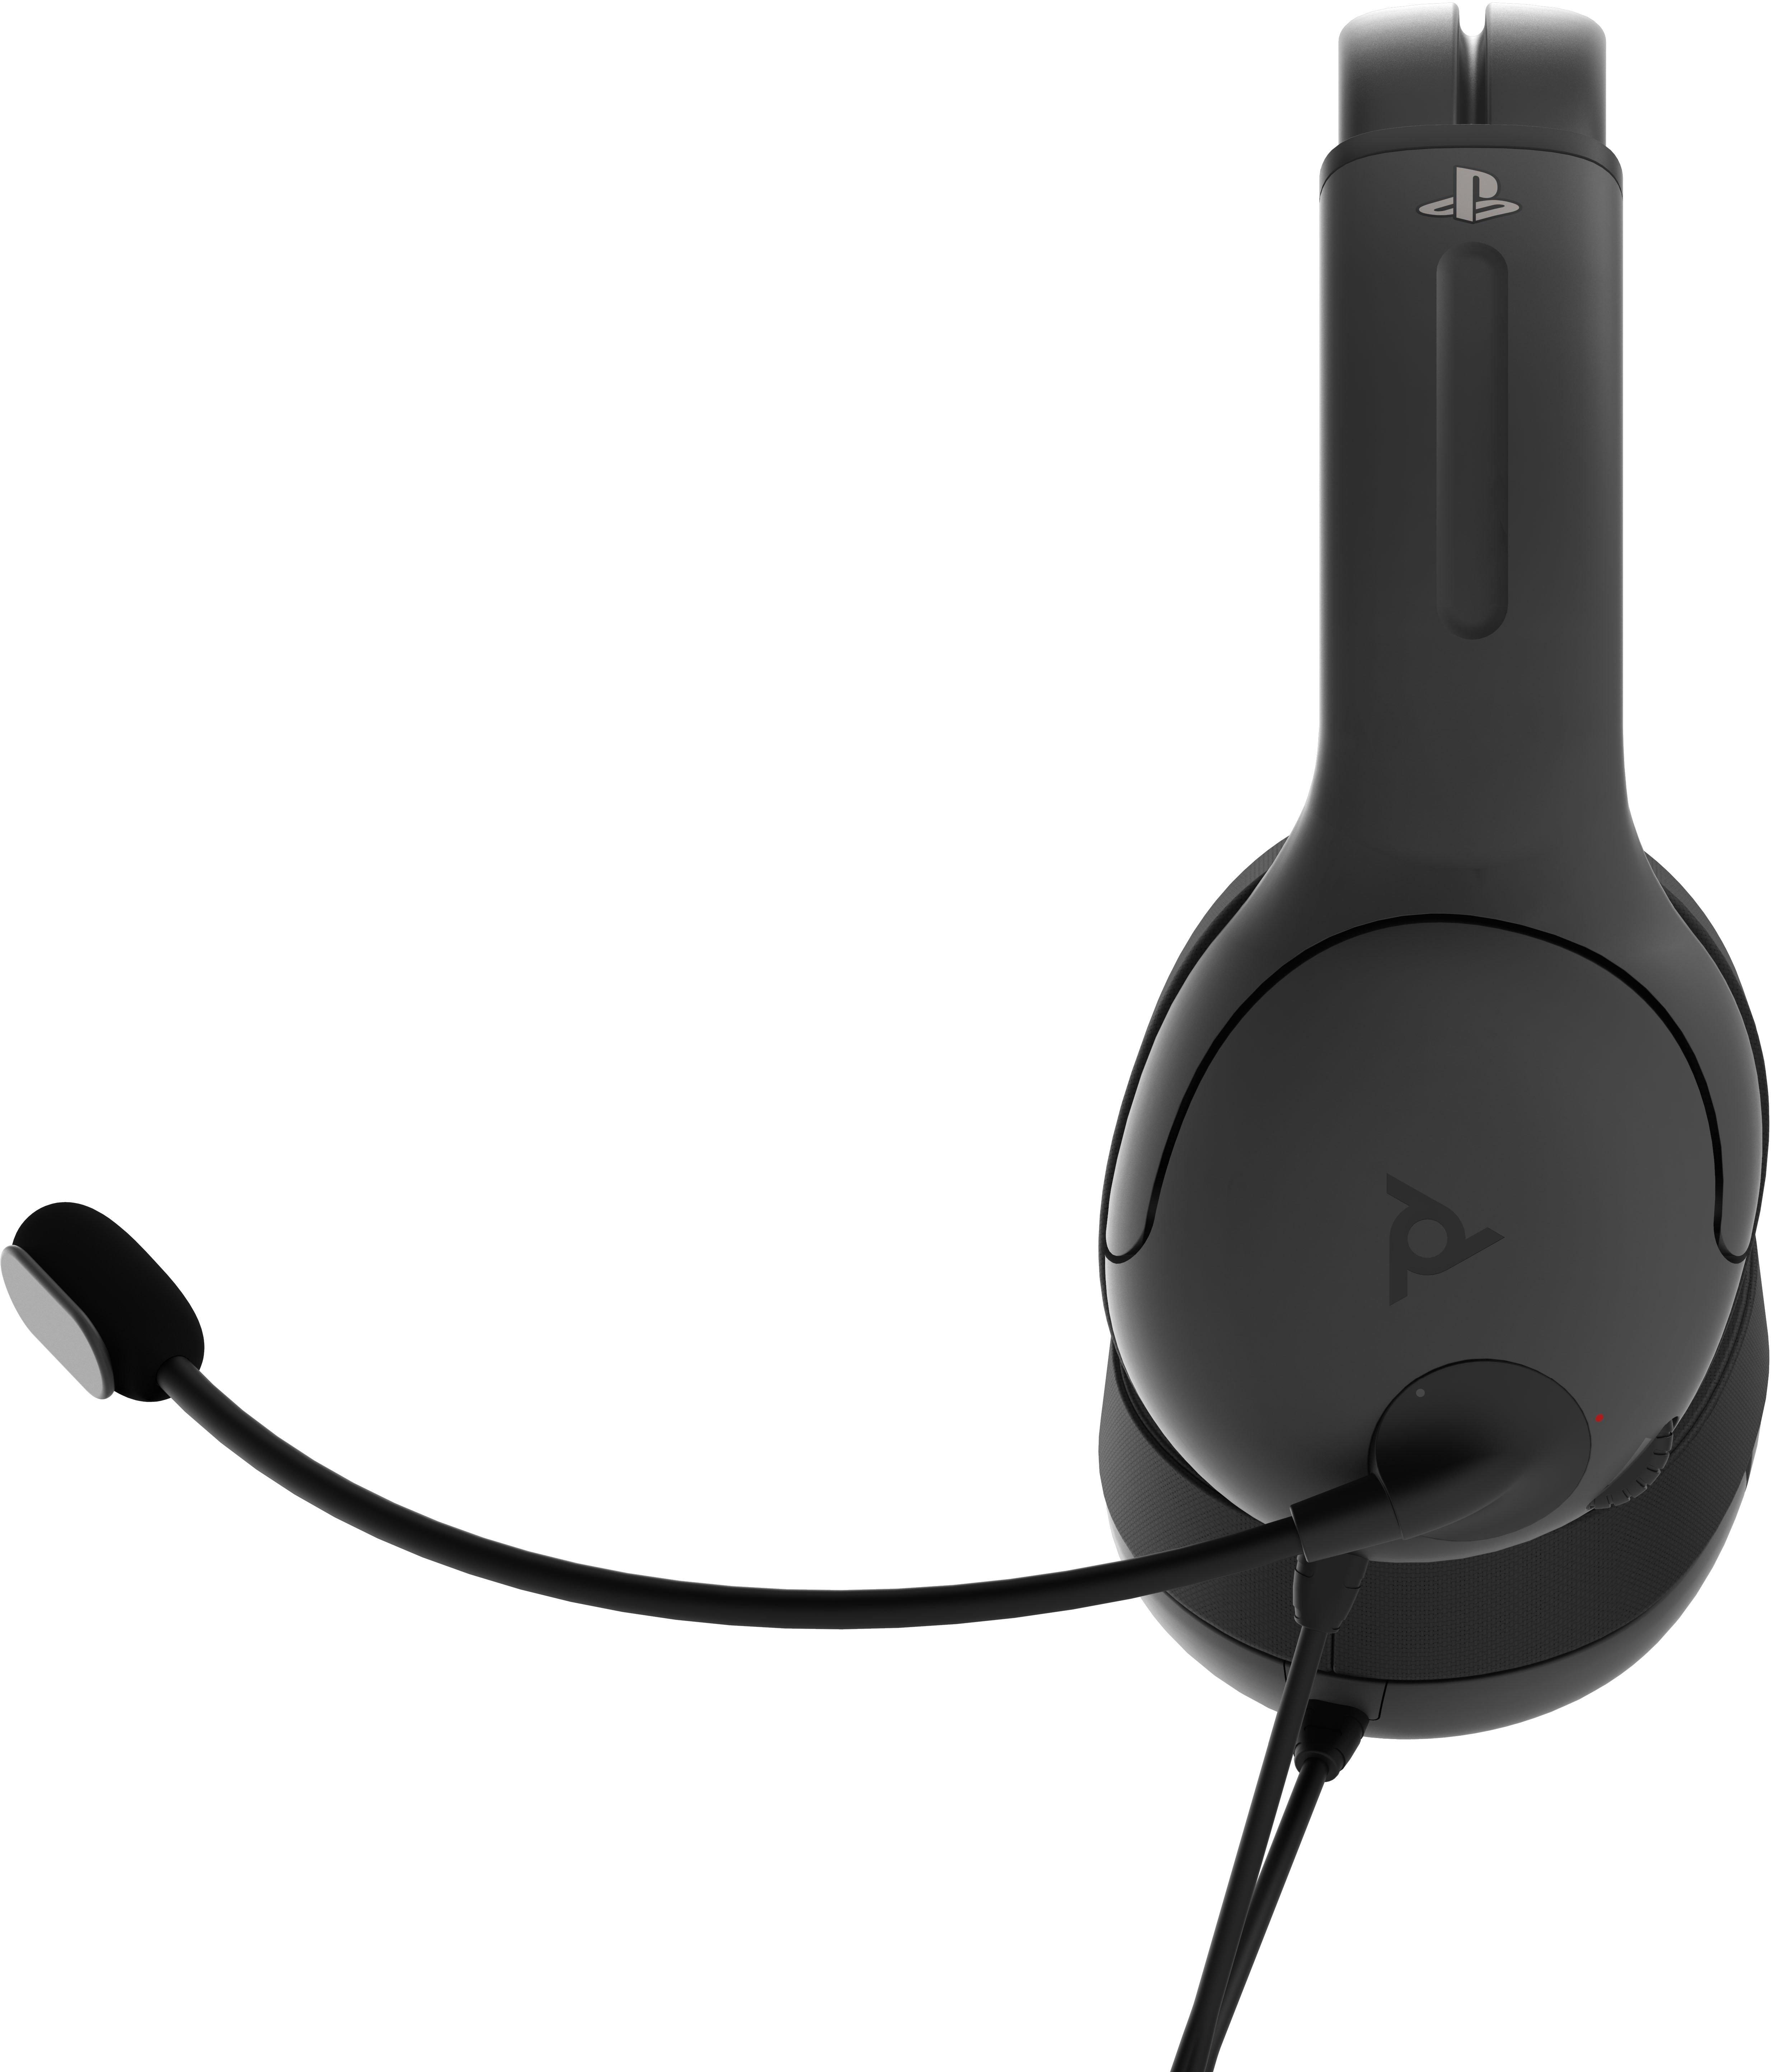 pdp lvl40 gaming headset for playstation 4